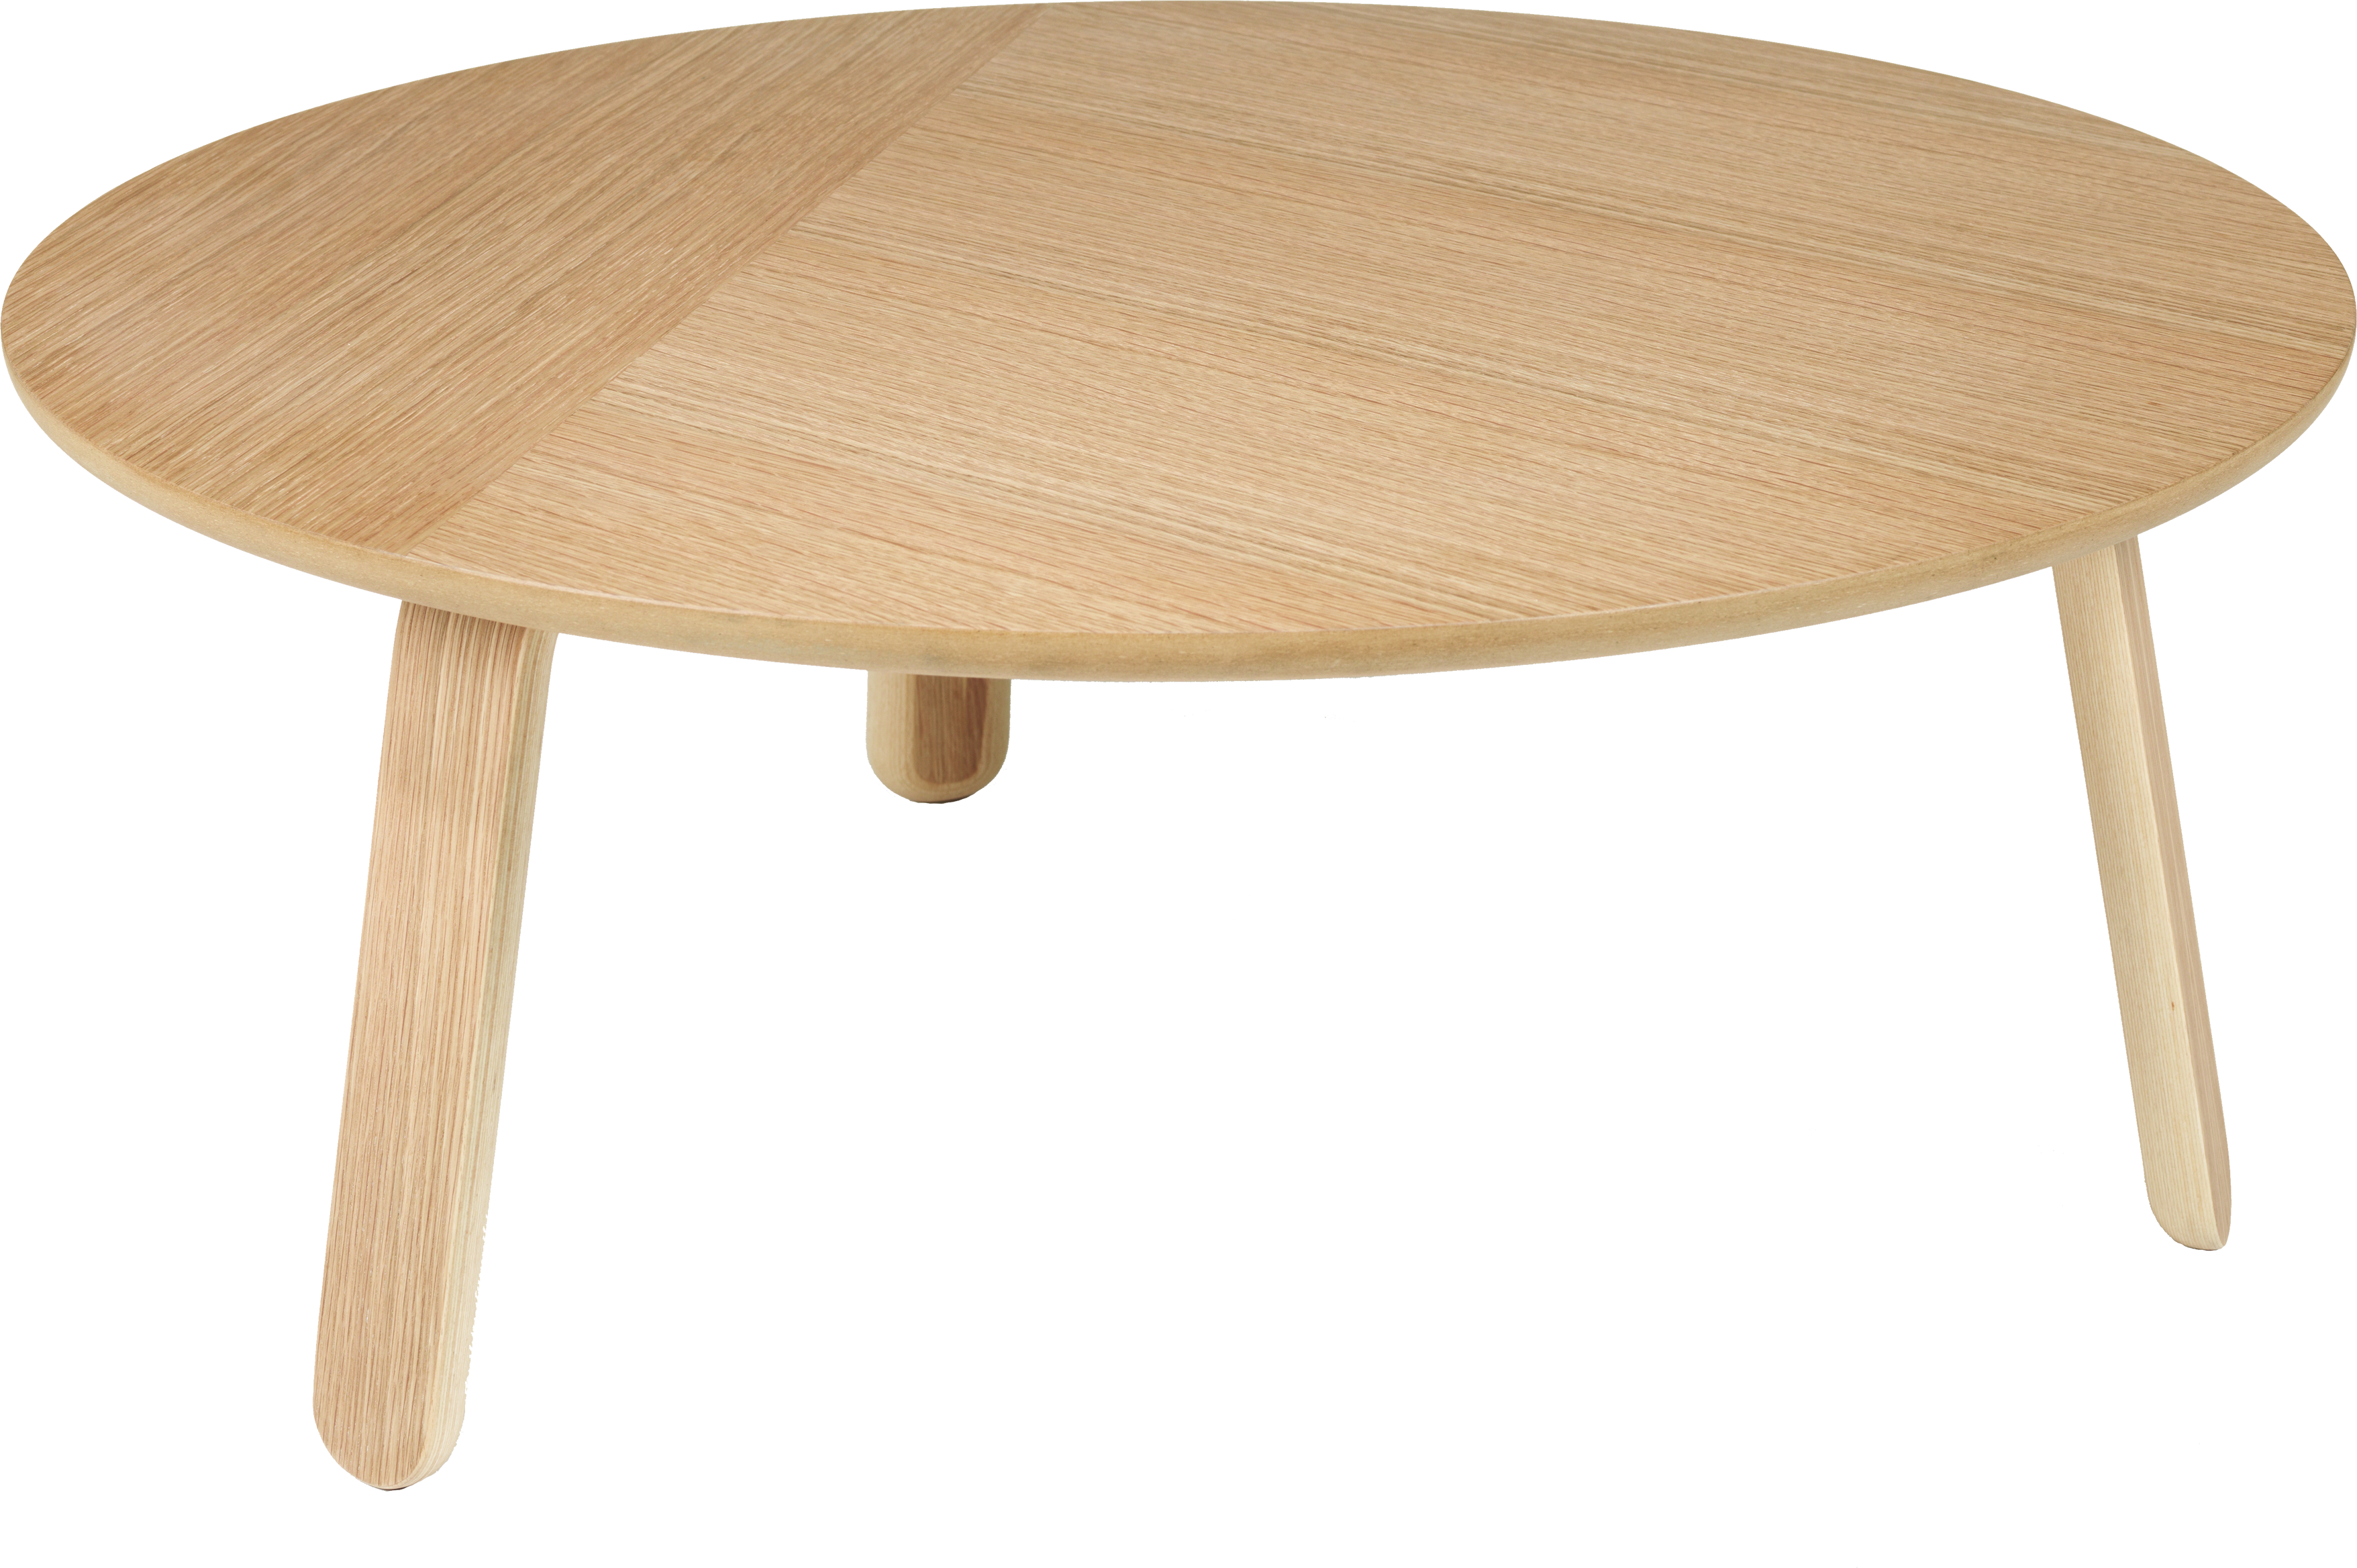 Wooden Table Png Image Intended For Transparent Side Tables For Living Rooms (View 19 of 20)